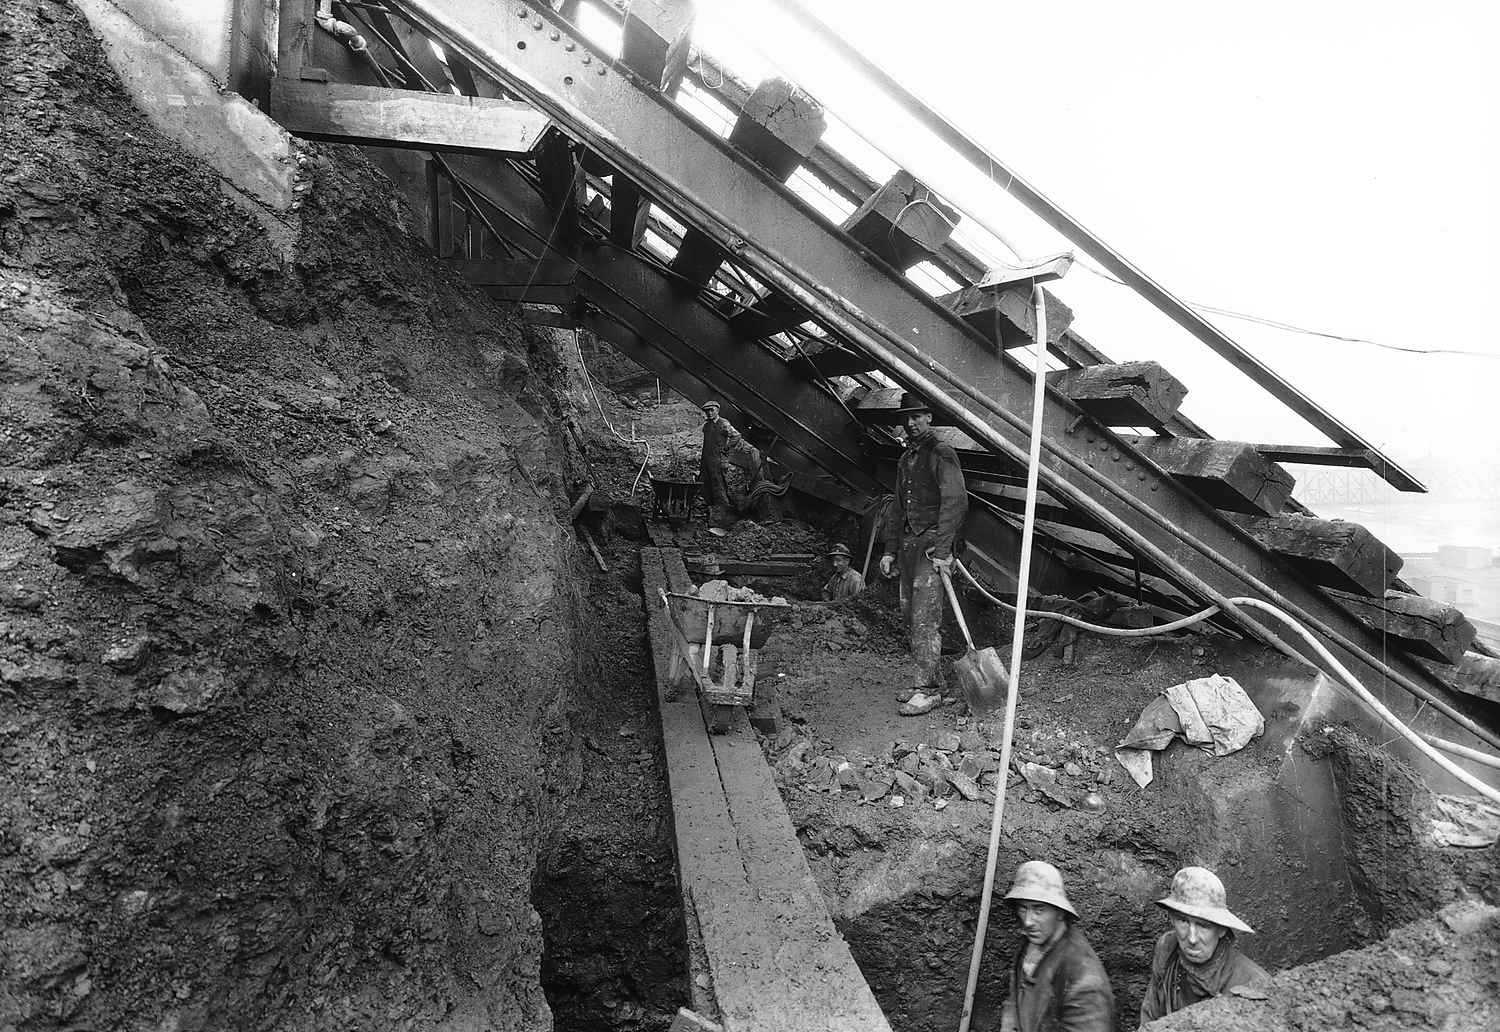 Farris Engineering Company workers excavating the land and adding supports under the Monongahela Incline to make way for the Mount Washington Roadway. Credit: Incline Supports, December 13, 1926, Pittsburgh City Photographer Collection, Historic Pittsburgh Site